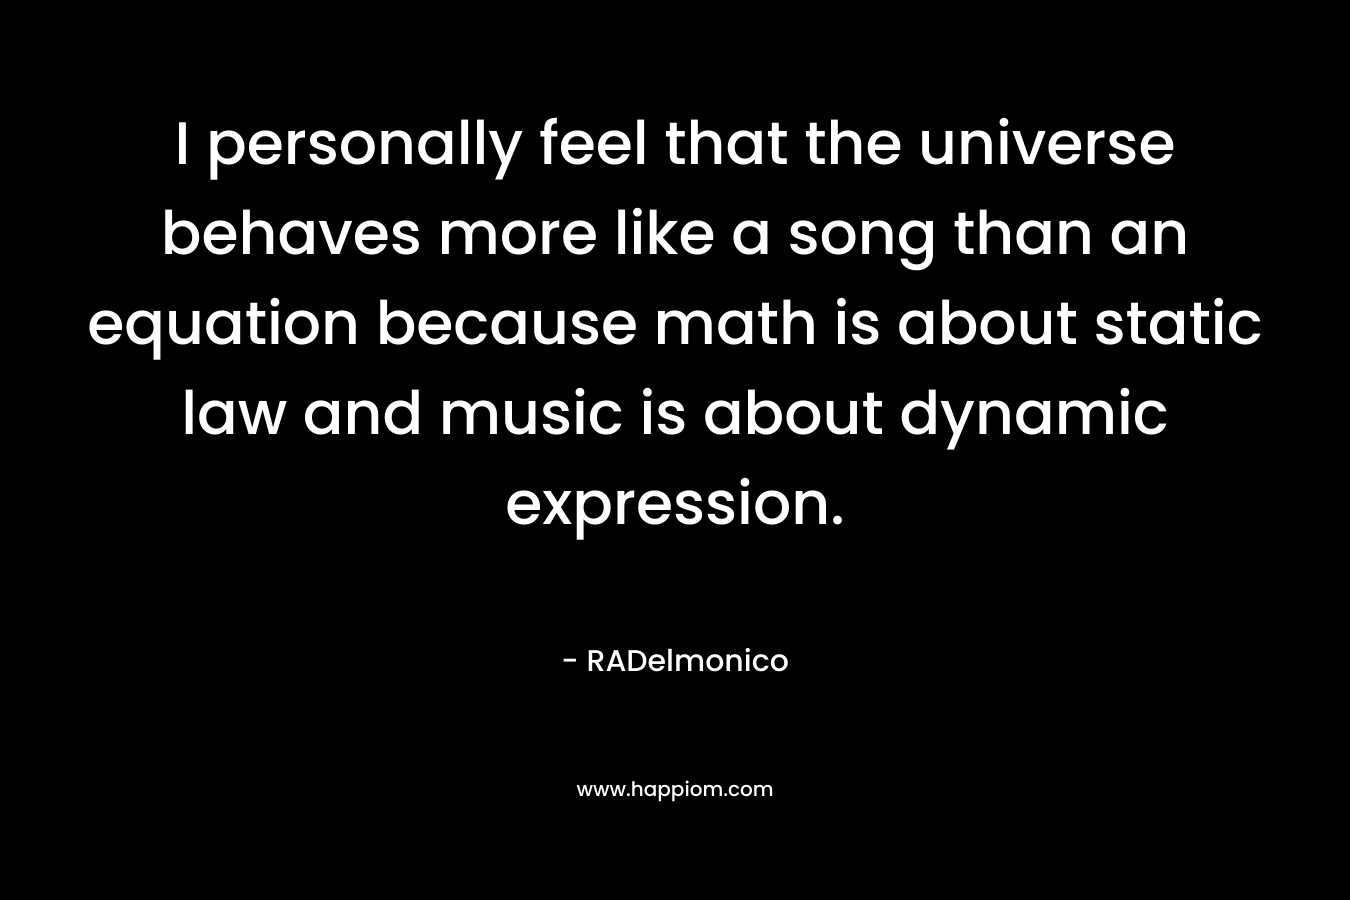 I personally feel that the universe behaves more like a song than an equation because math is about static law and music is about dynamic expression.